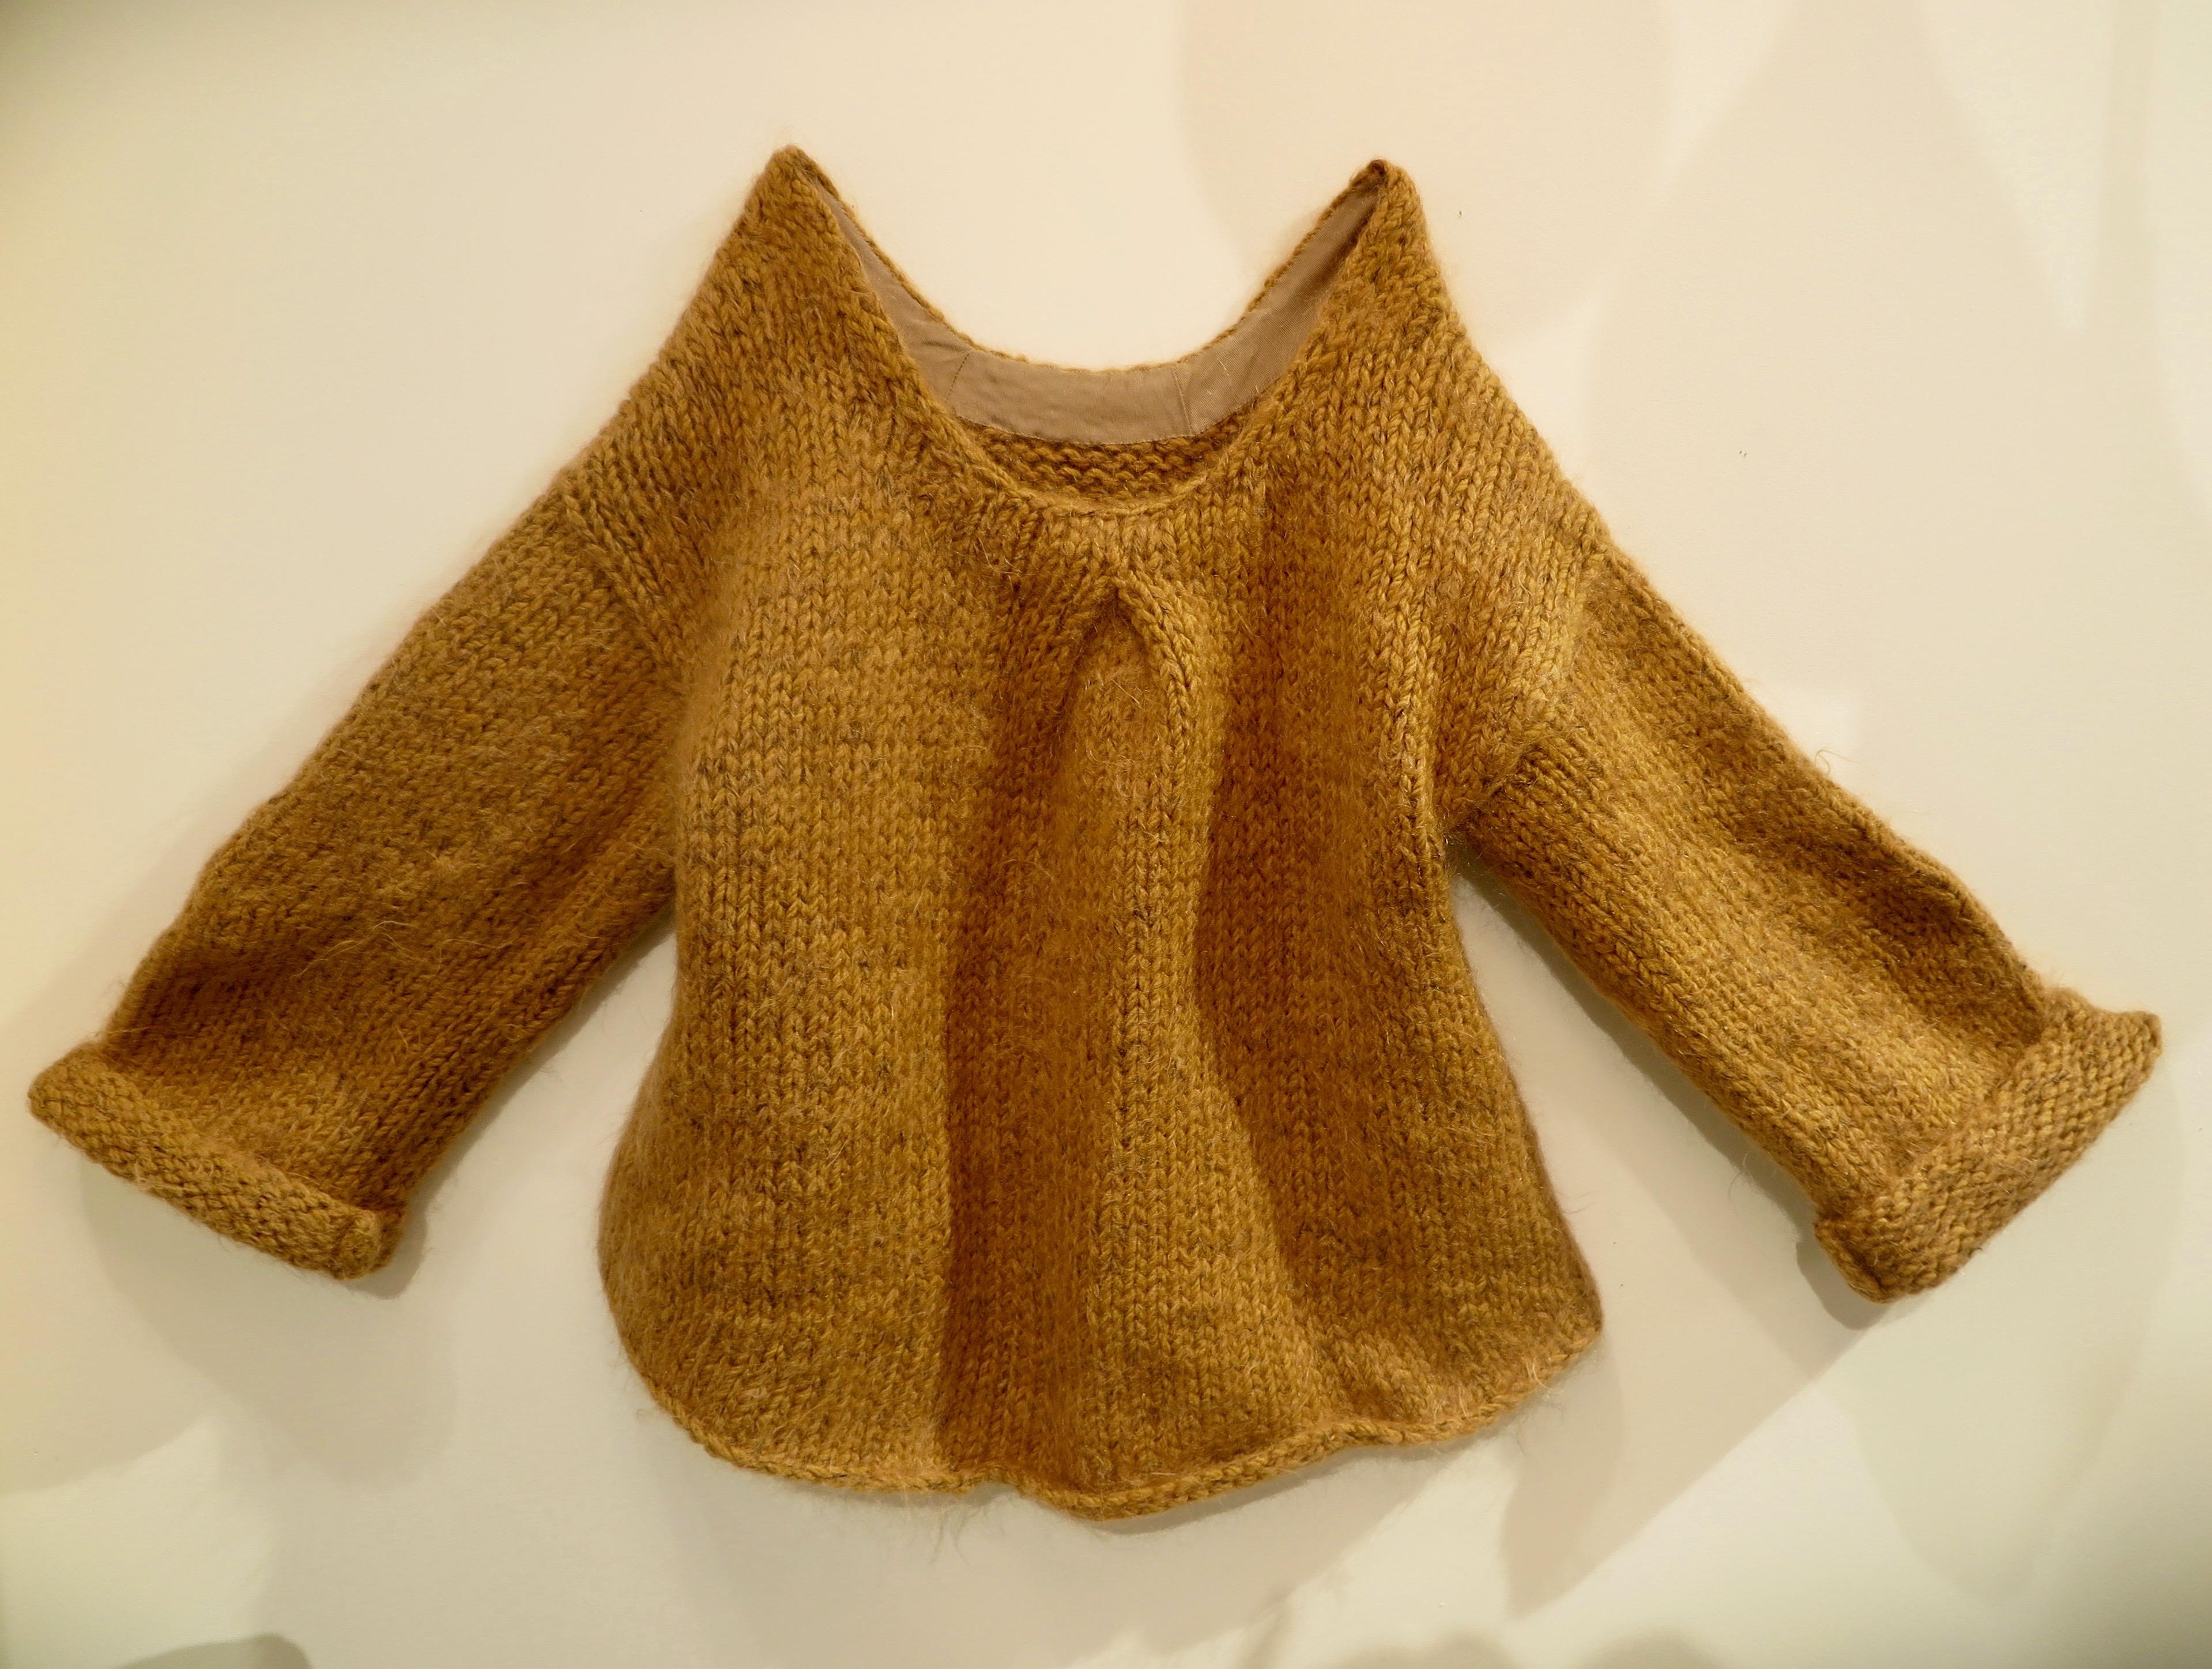 Hand knit sweater in mohair in salmon color with shorter height in front and longer in back by Dries Van Noten.